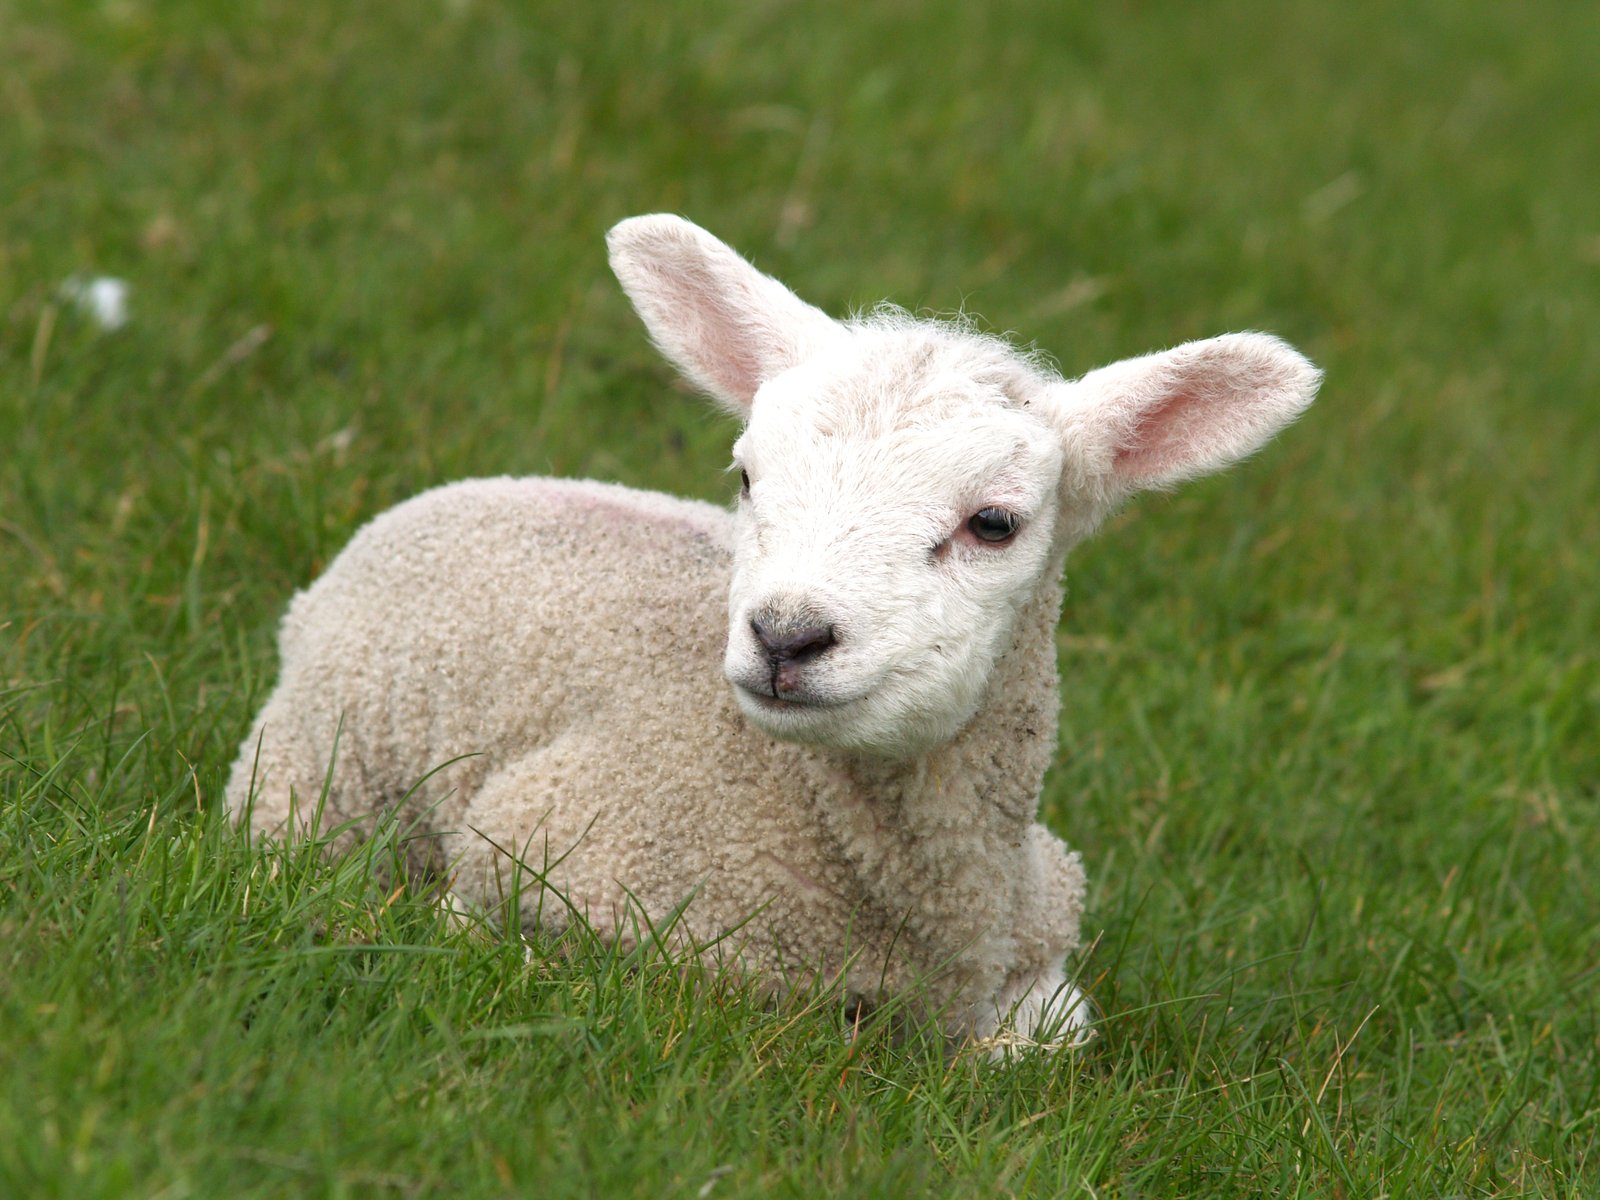 a baby sheep is sitting in a field of grass